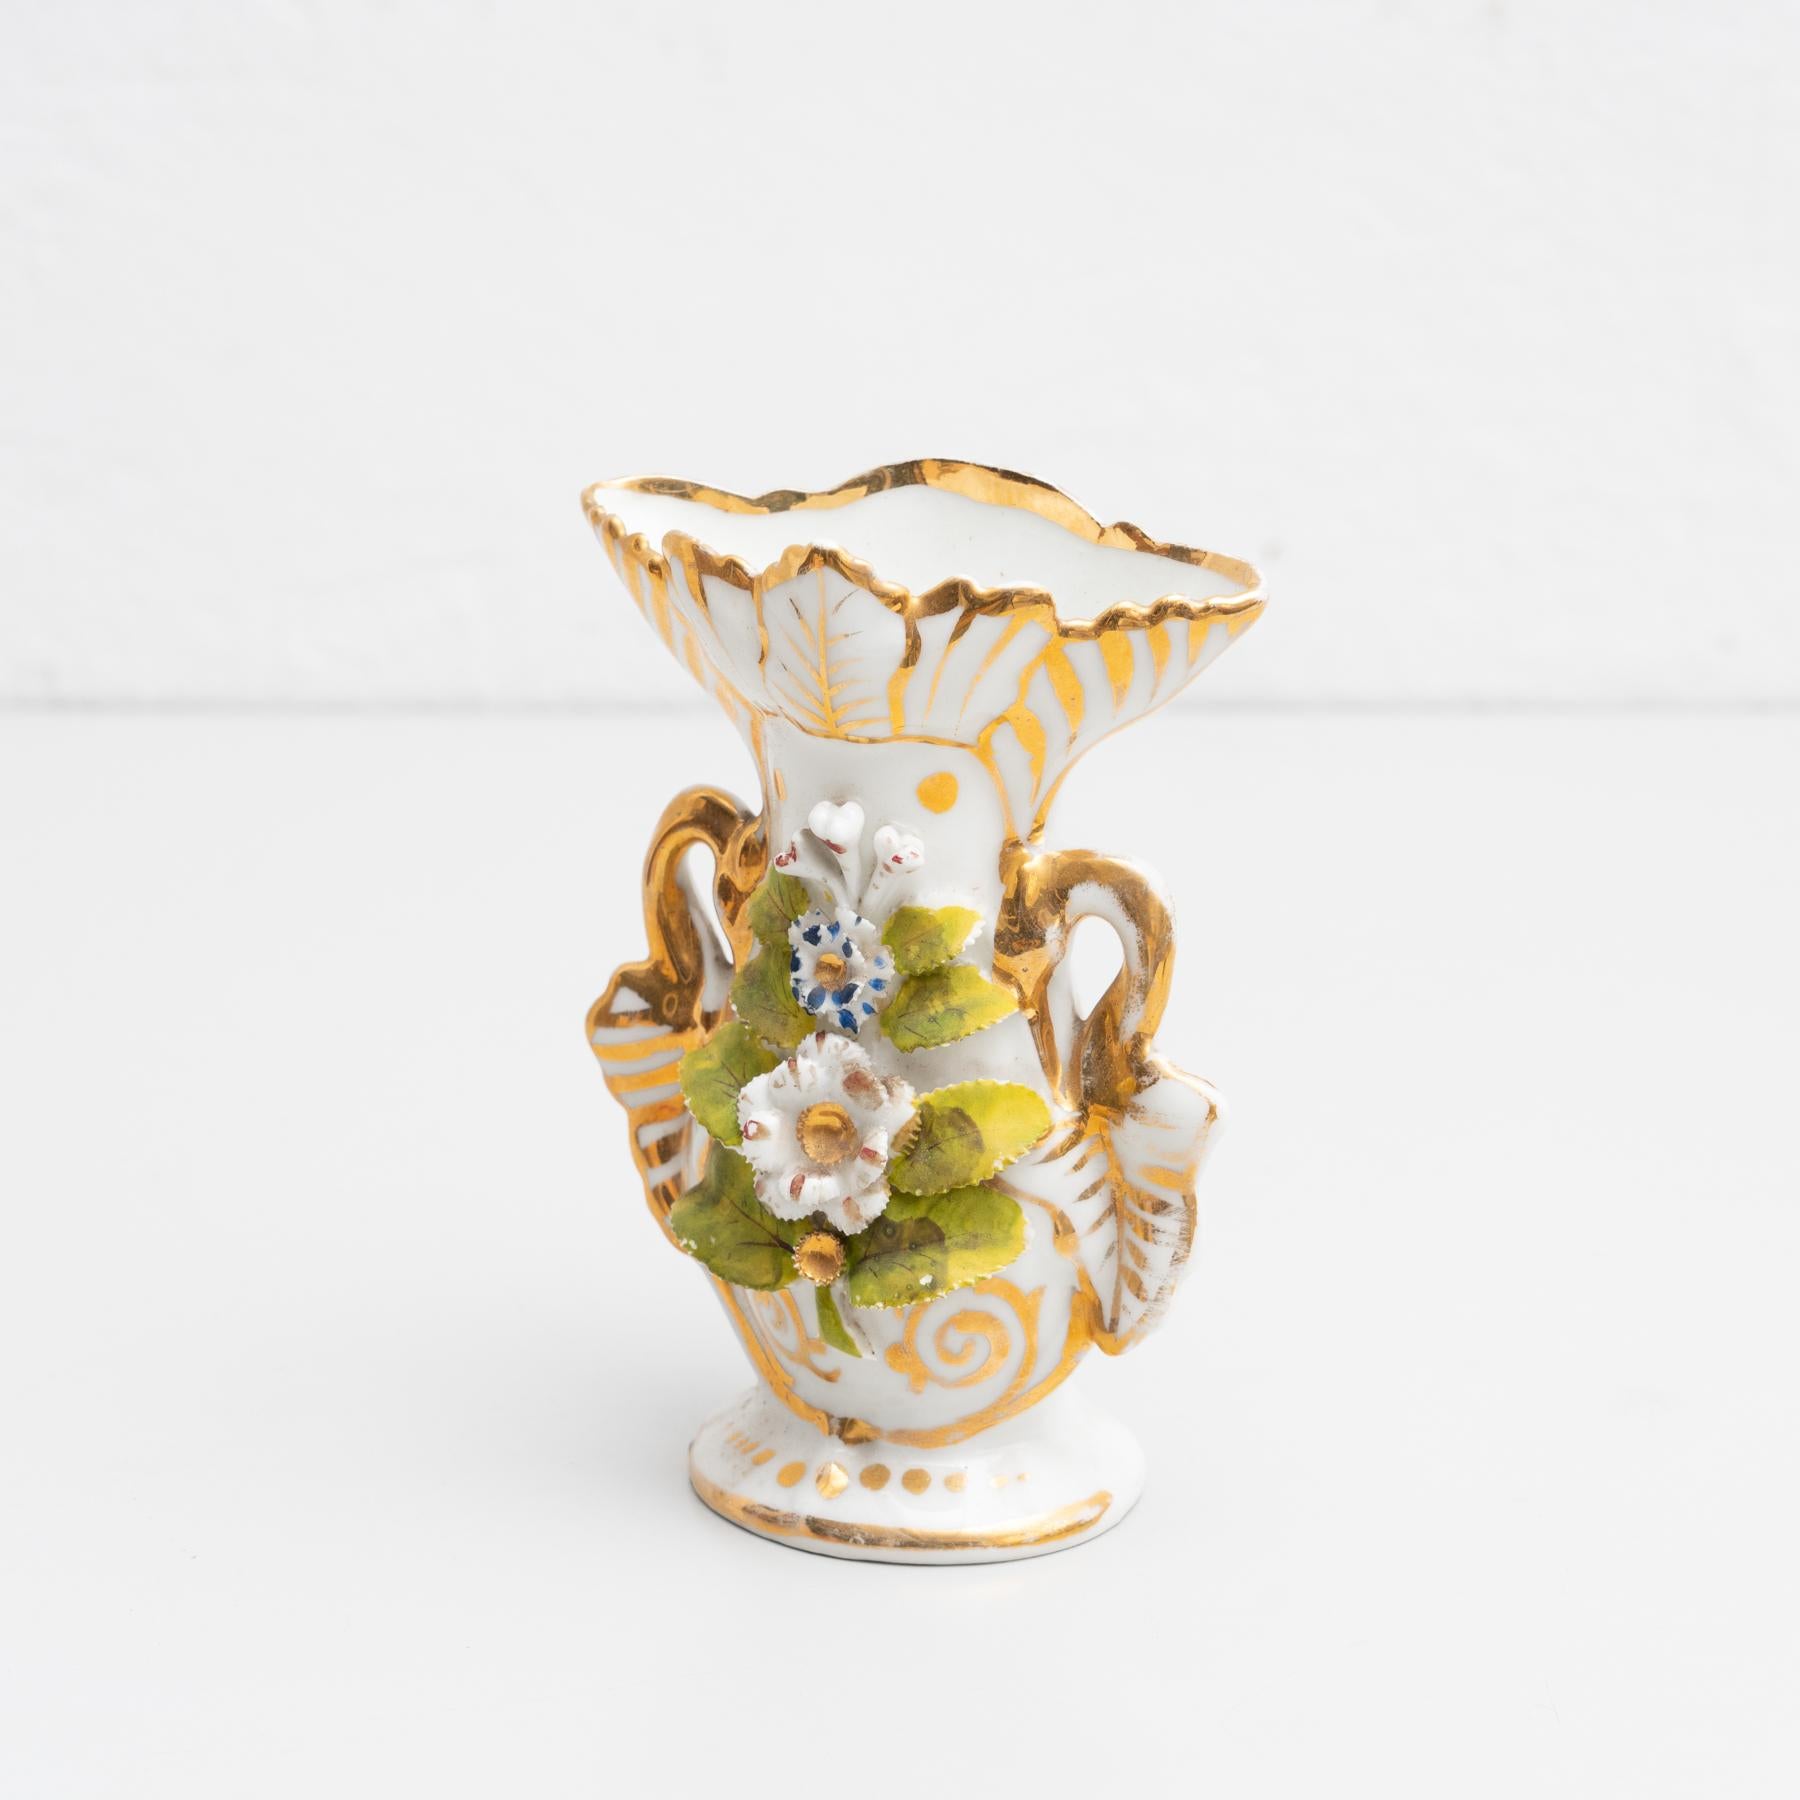 Isabelline hand-painted porcelain vase in the Serves style. 

Made by unknown manufacturer in Spain, circa 19th Century.

In original condition, with minor wear consistent with age and use, preserving a beautiful